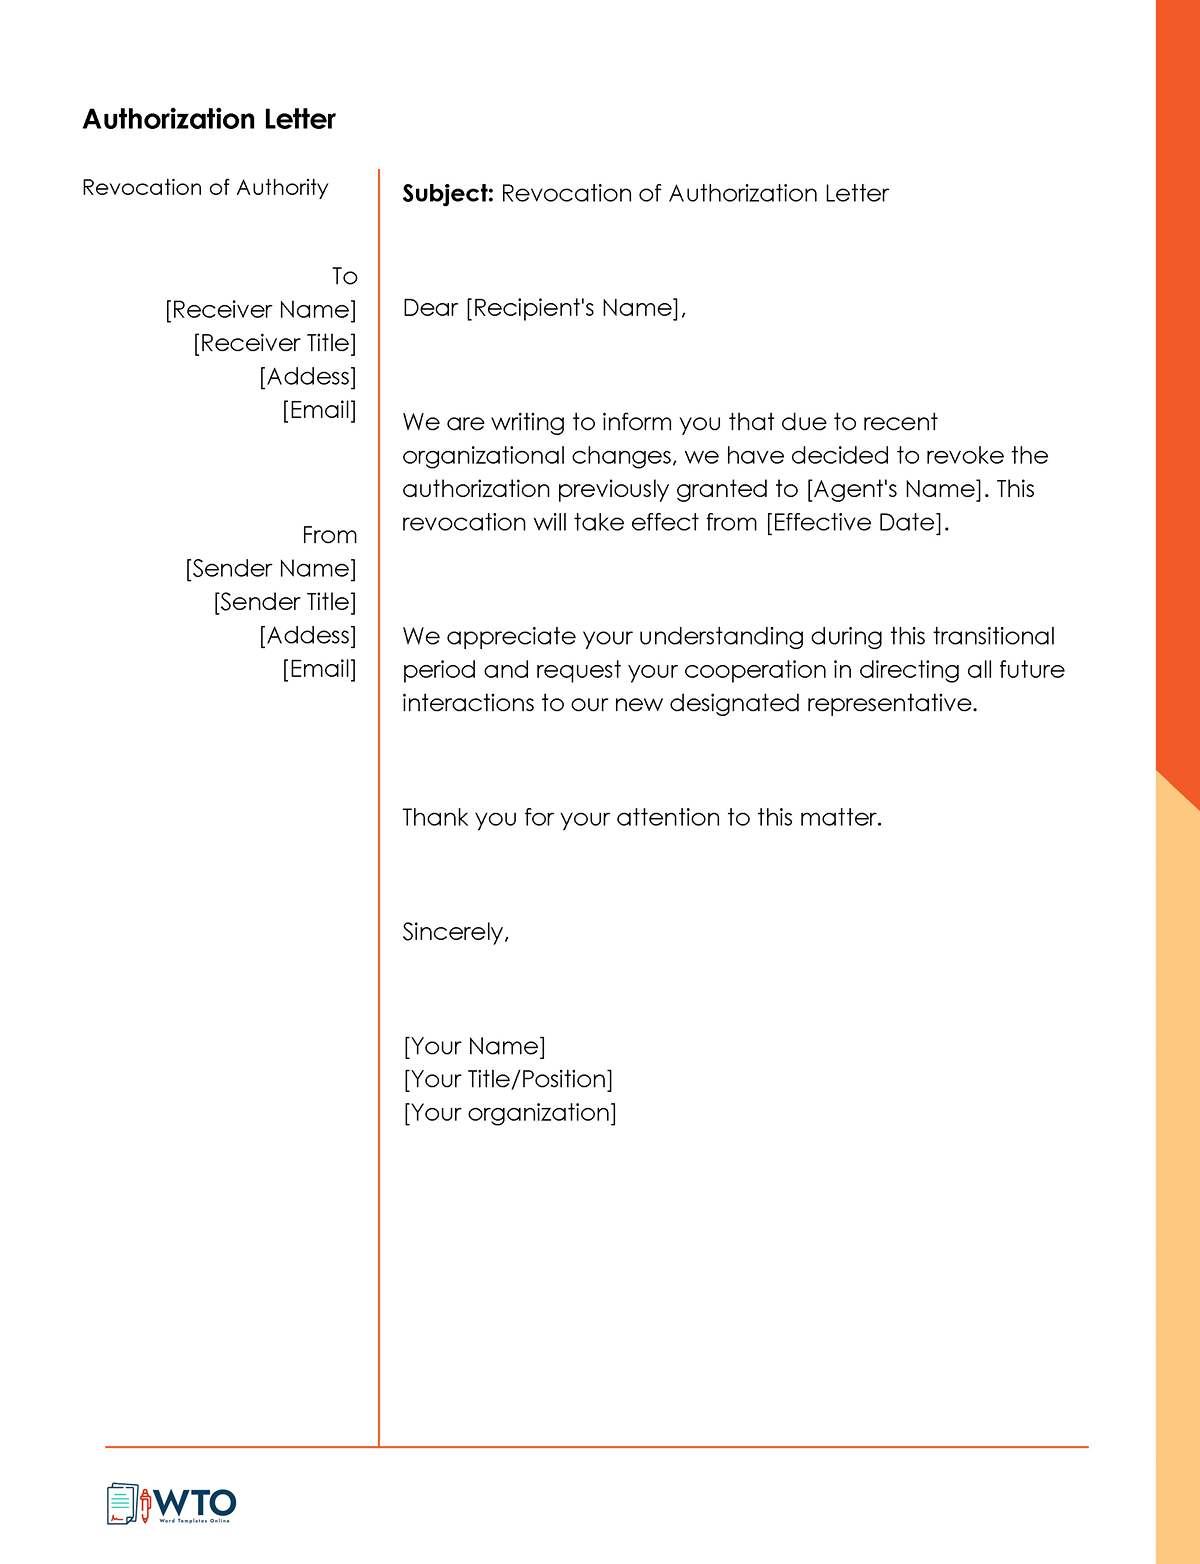 Revoke Authorization LetterTemplate-Ms Word Free Download